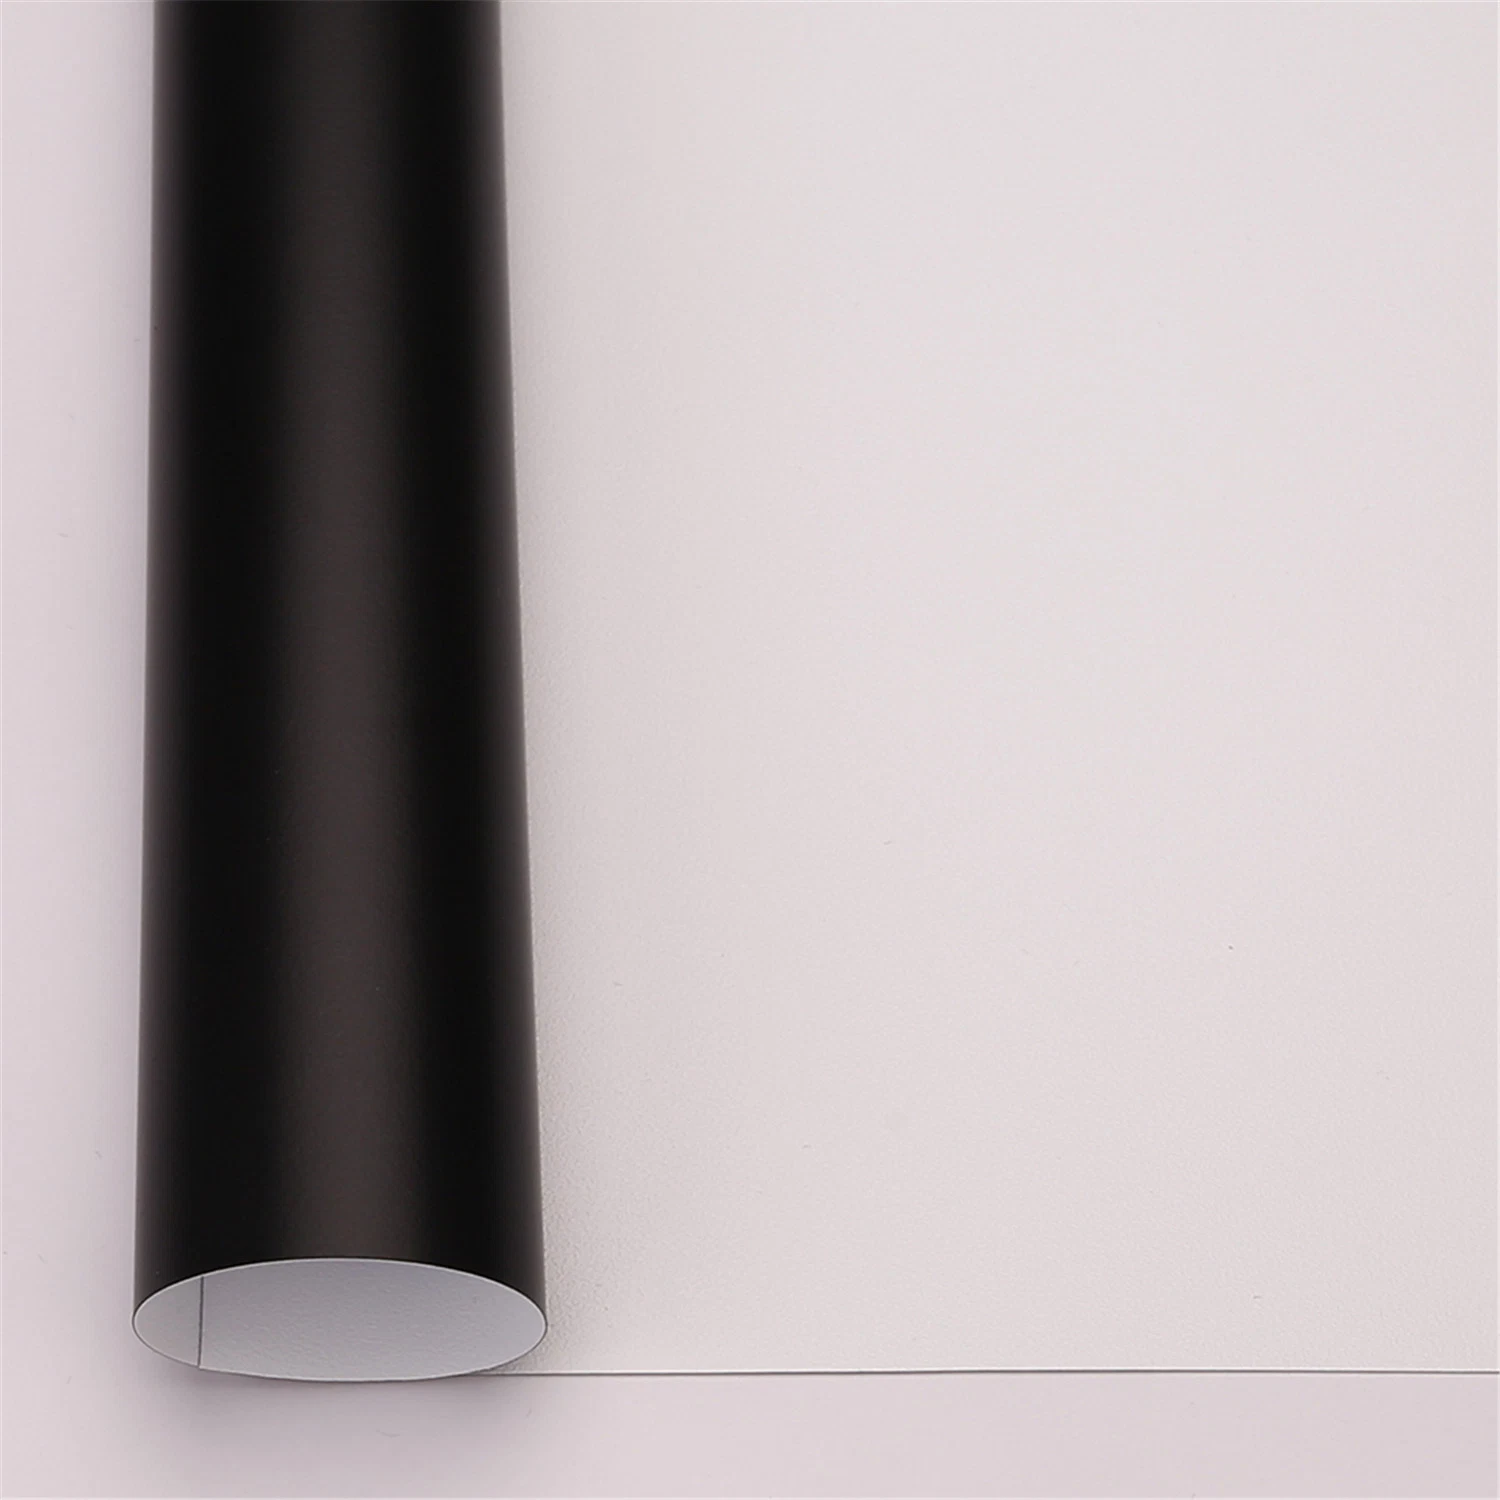 5m Width White-Black Projection Screen Film for Electric Projector Screen